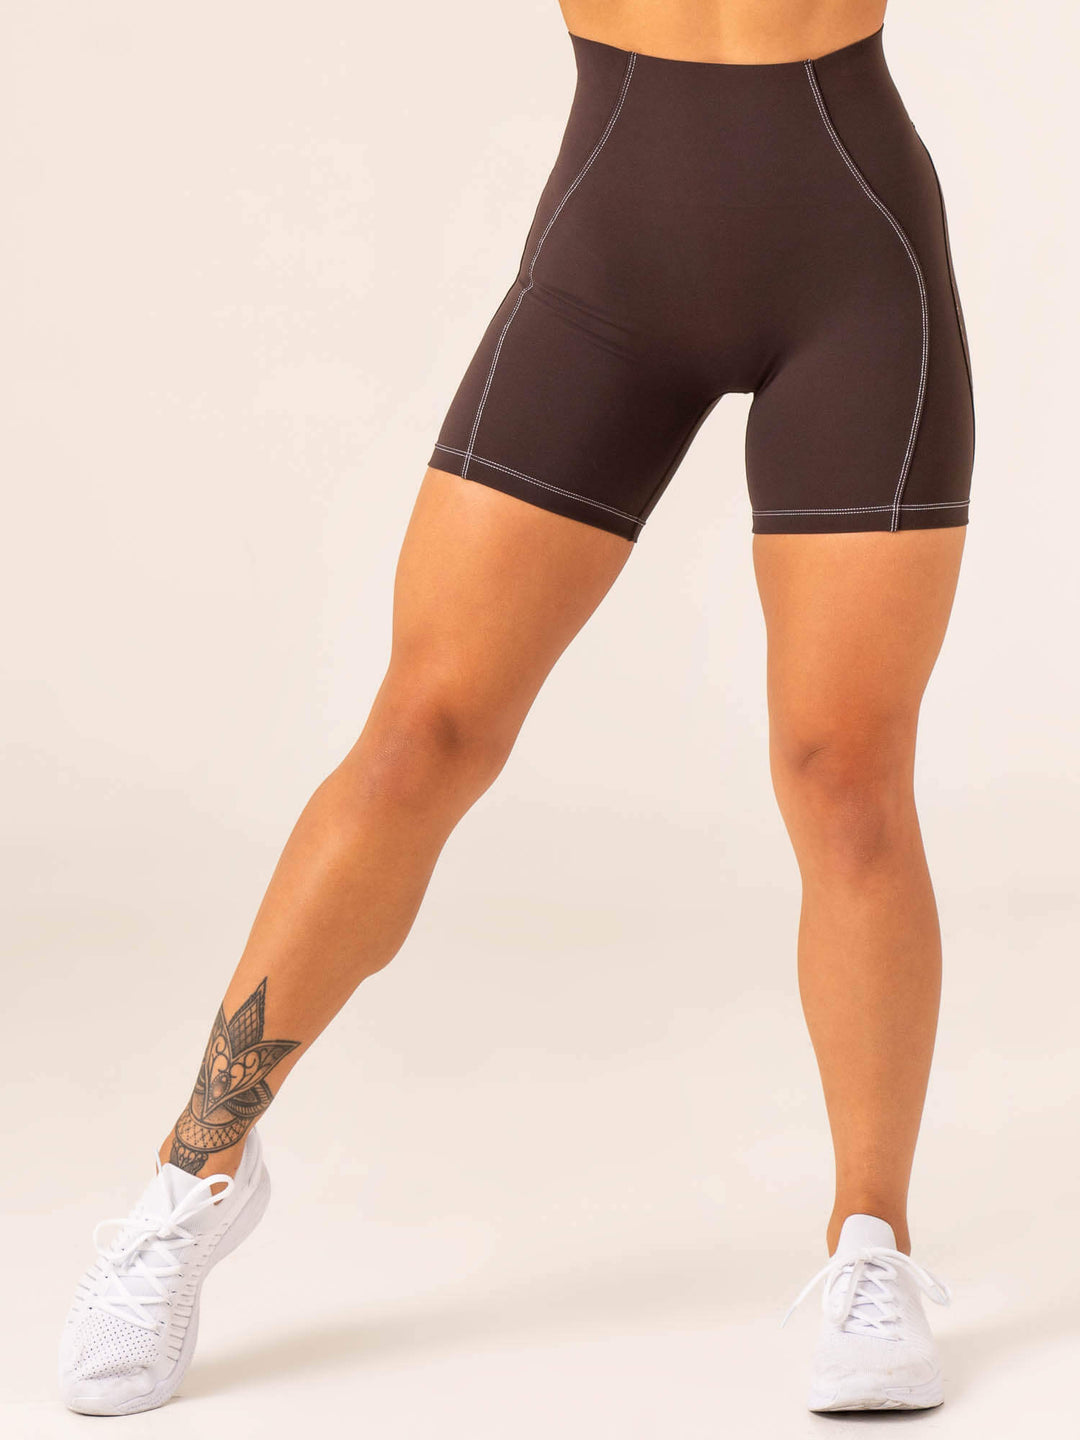 Stride High Waisted Shorts - Chocolate Clothing Ryderwear 